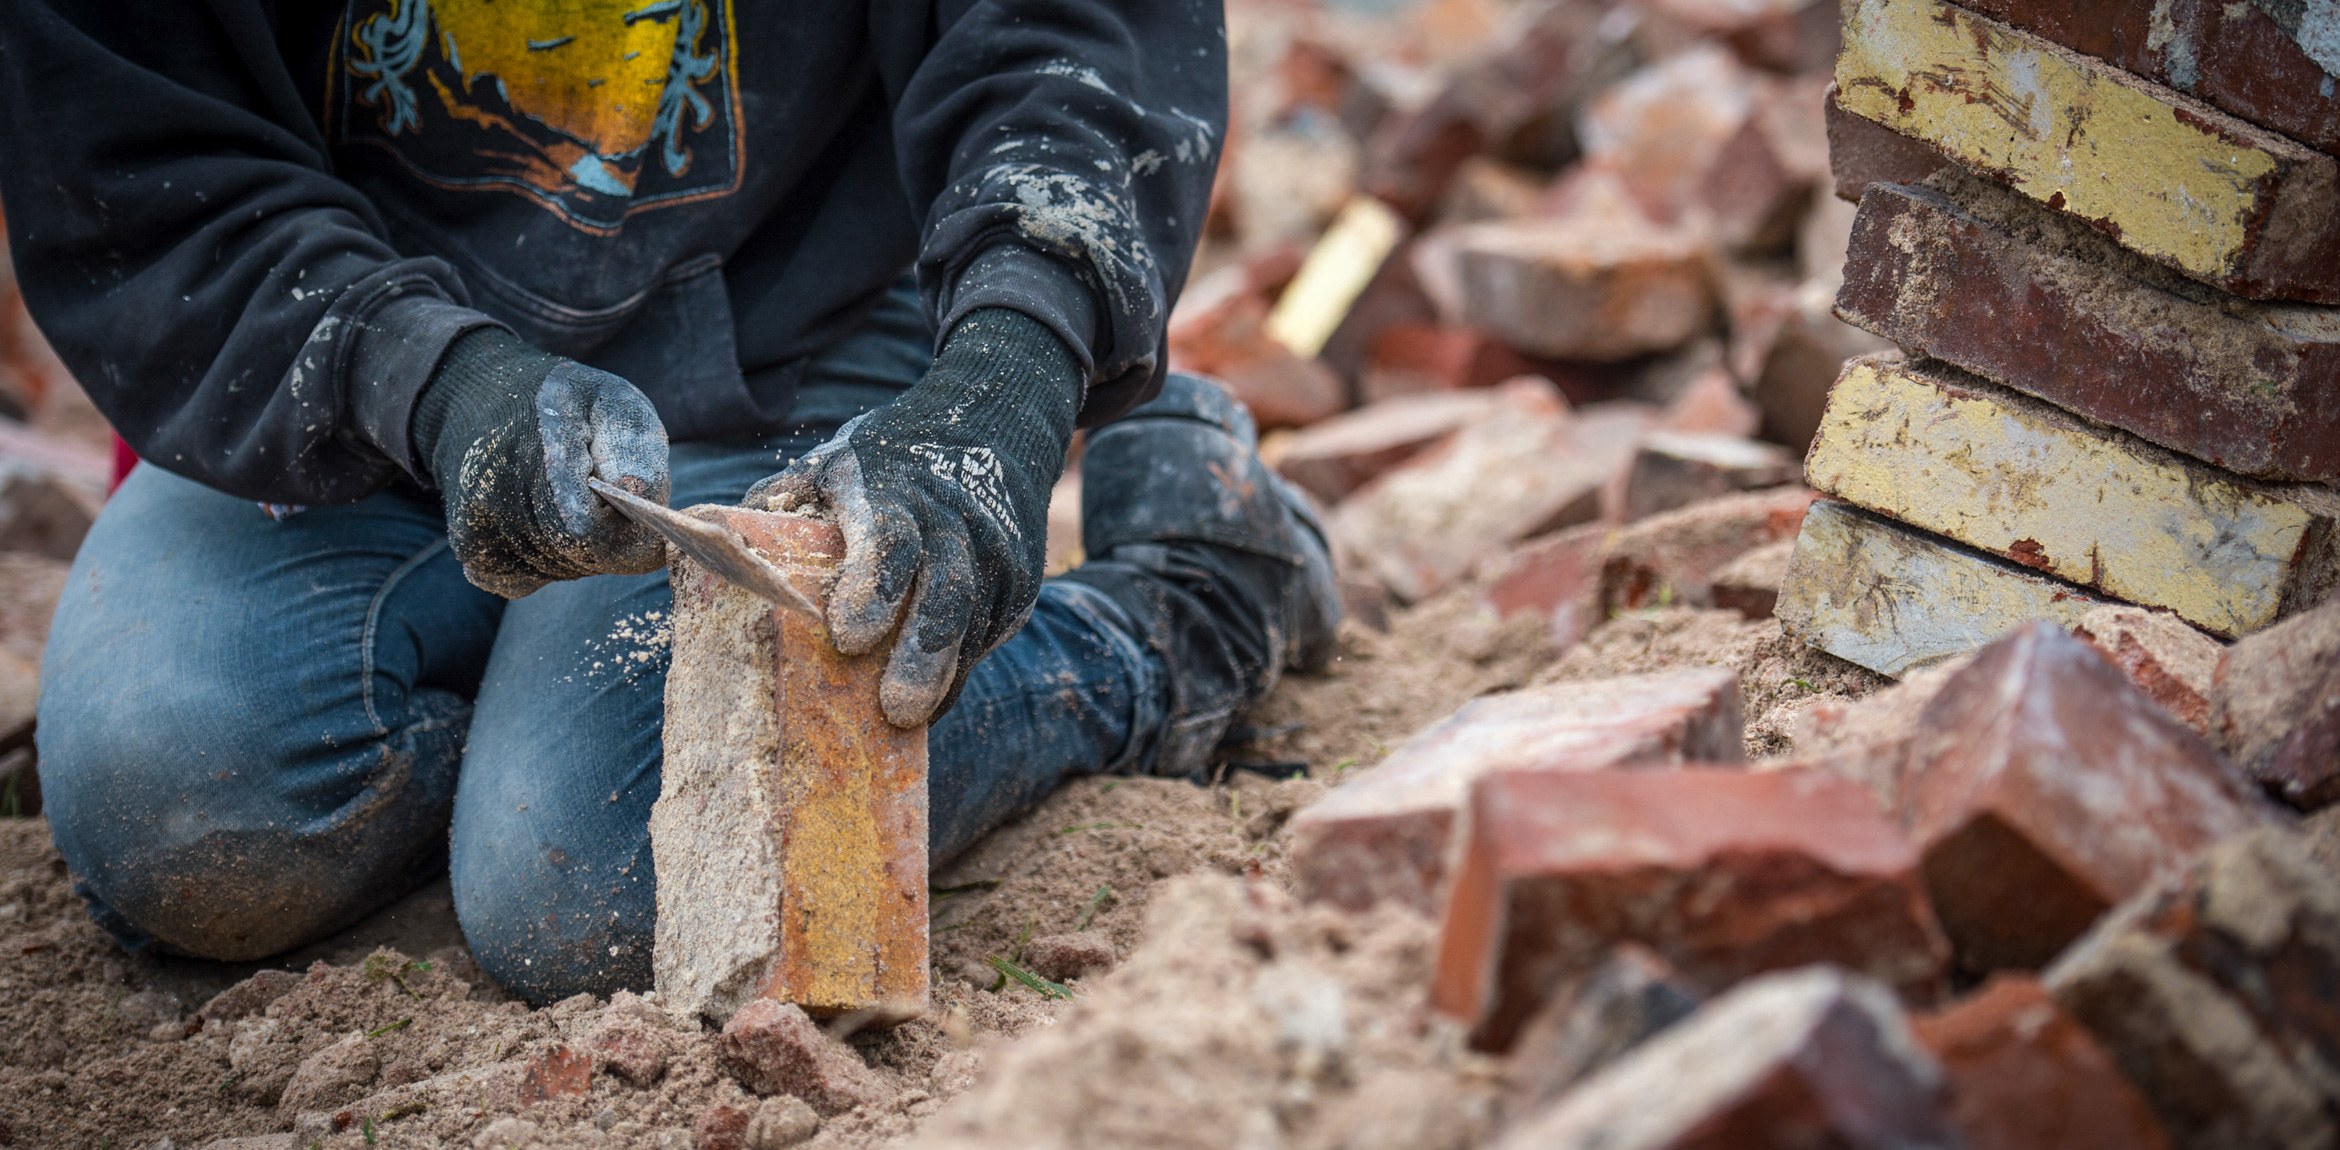 A participant kneels in a pile of bricks and dirt, holding a brick in their hand and grinding a knife against it.